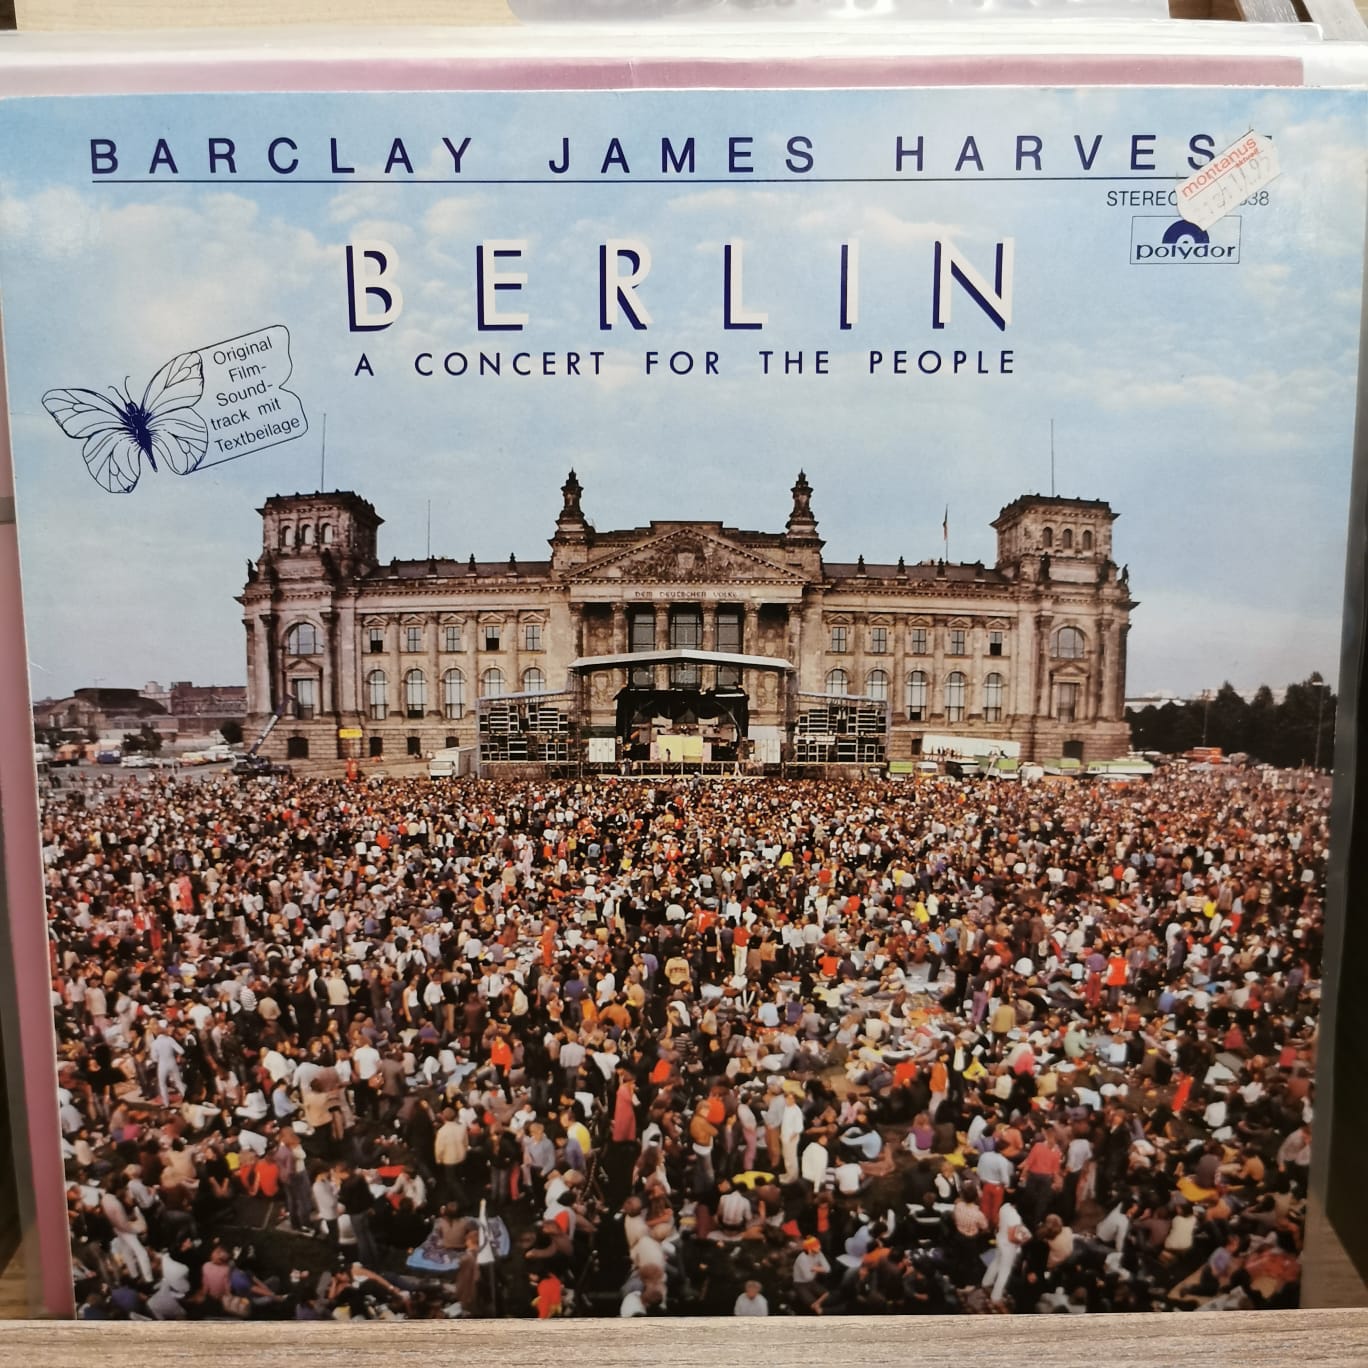 BARCLAY JAMES HARVEST BERLIN A CONCERT FOR THE PEOPLE Vinyl, LP